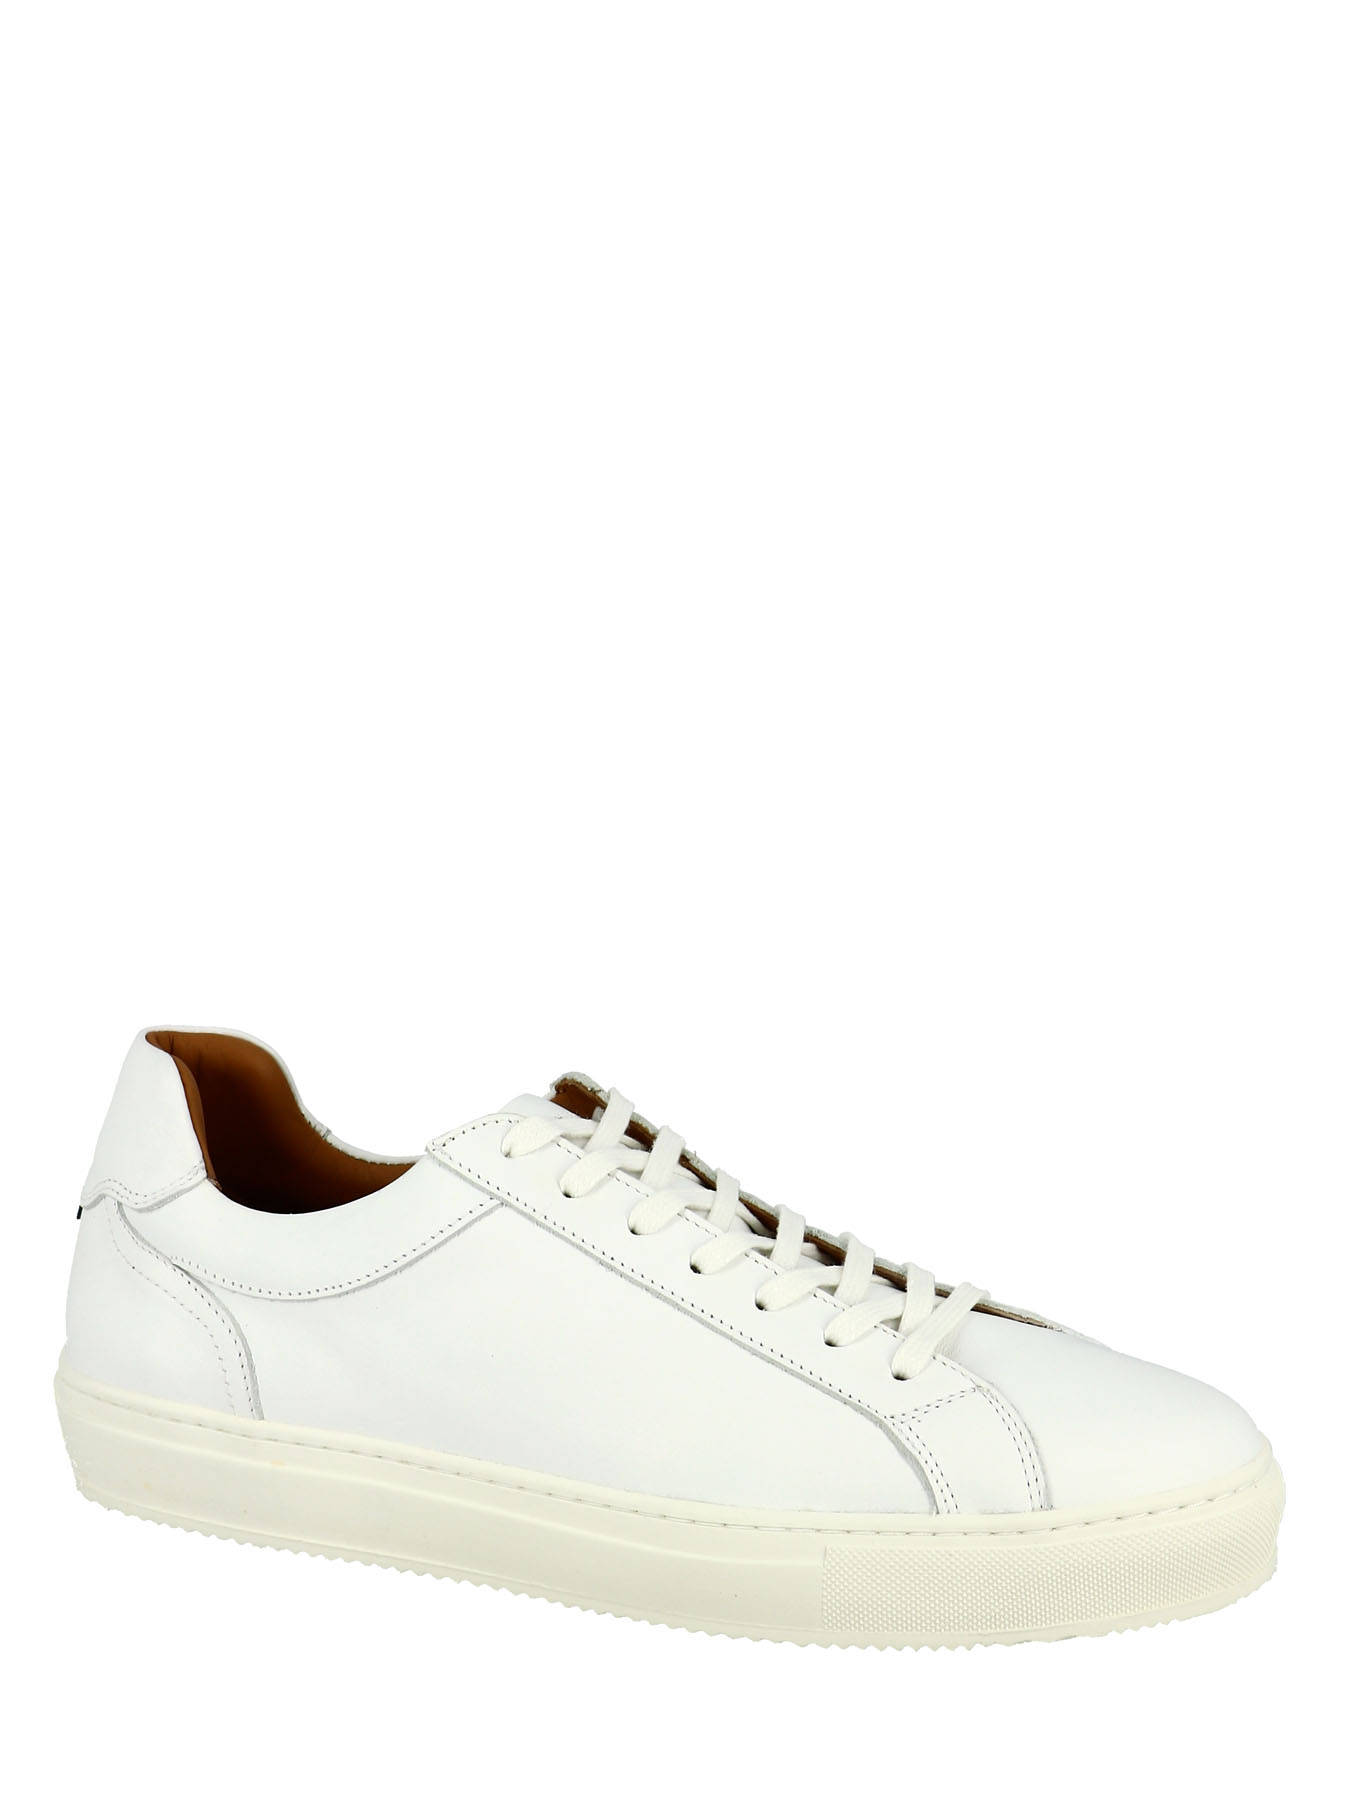 white leather tommy hilfiger sneakers